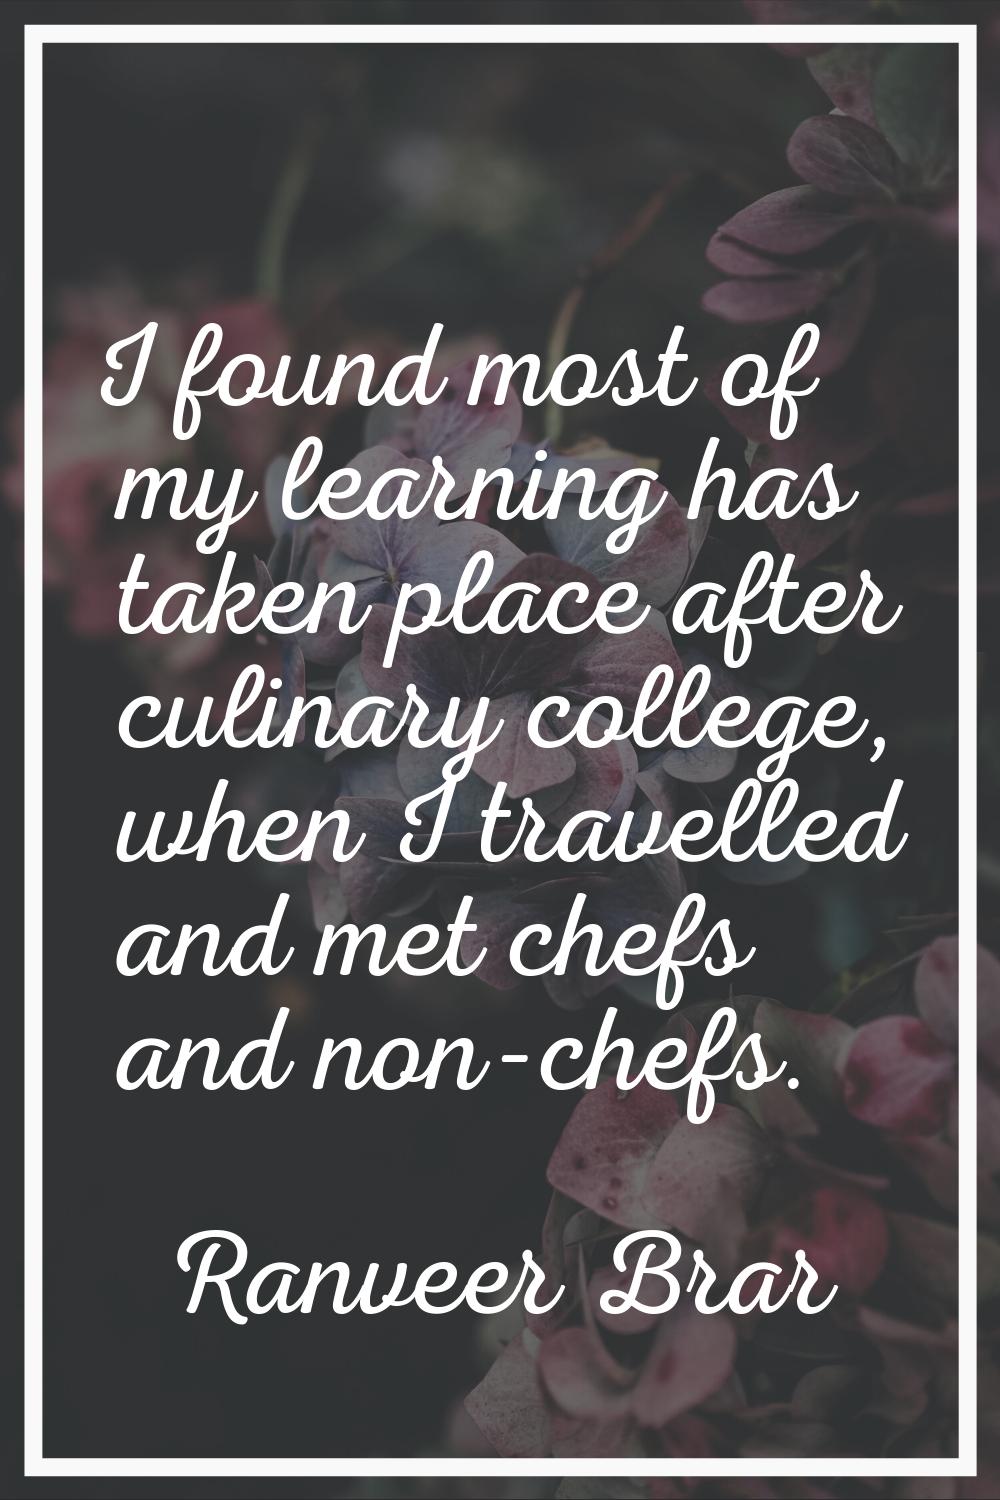 I found most of my learning has taken place after culinary college, when I travelled and met chefs 